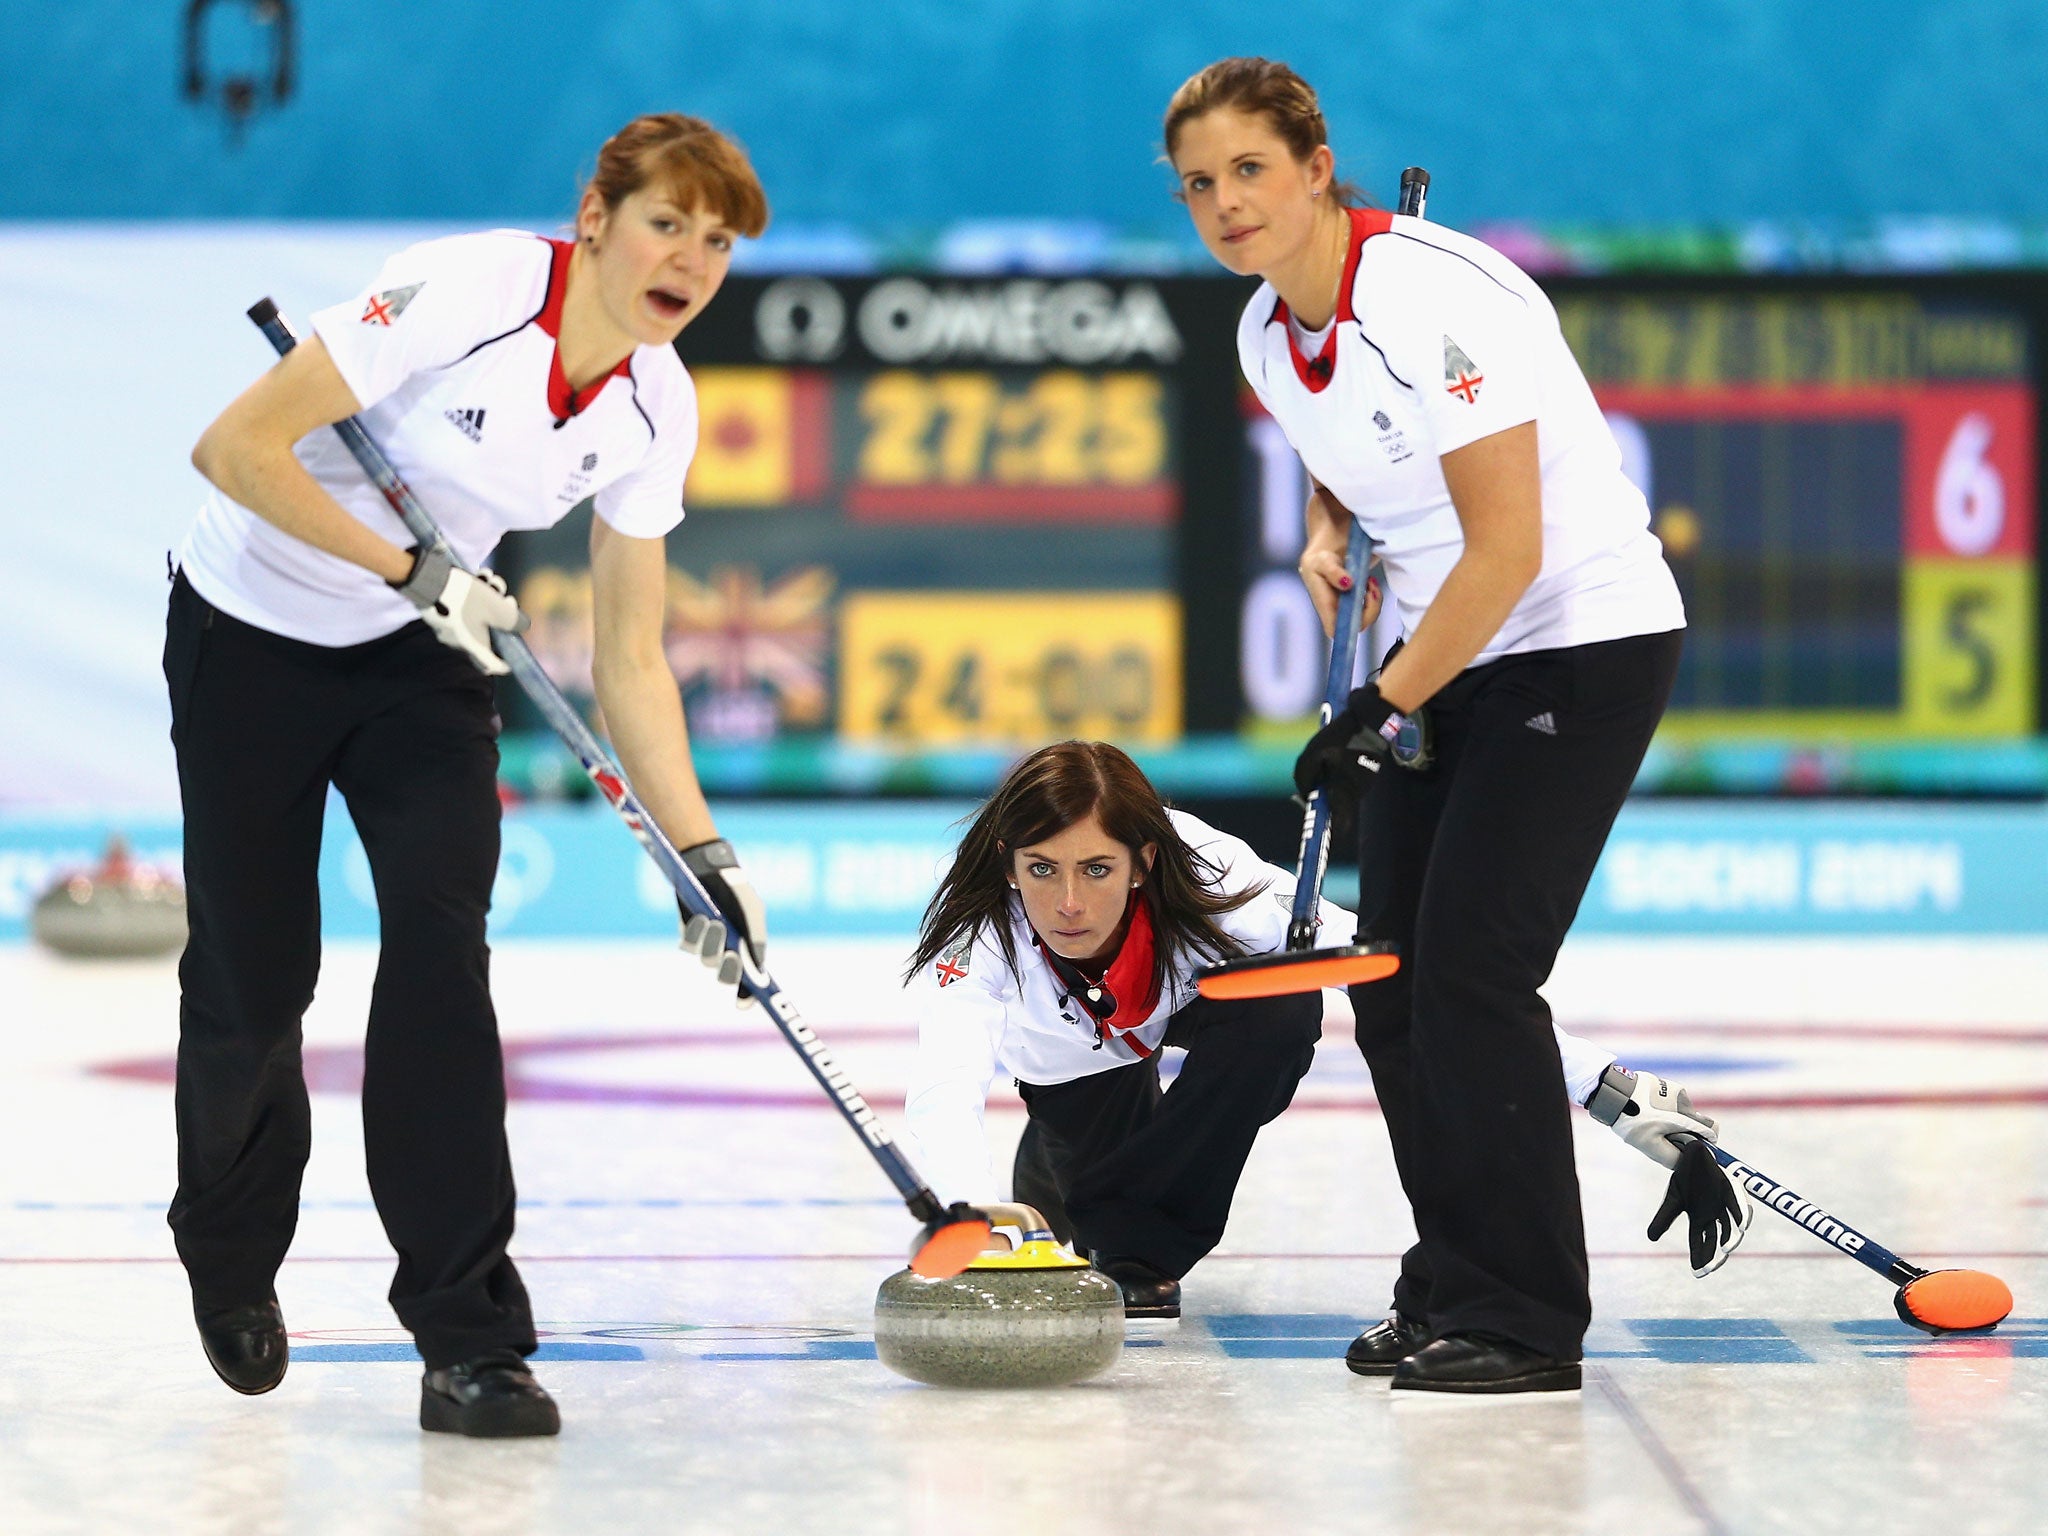 Eve Muirfield guides a stone across the ice during Great Britain's 9-6 defeat to Canada